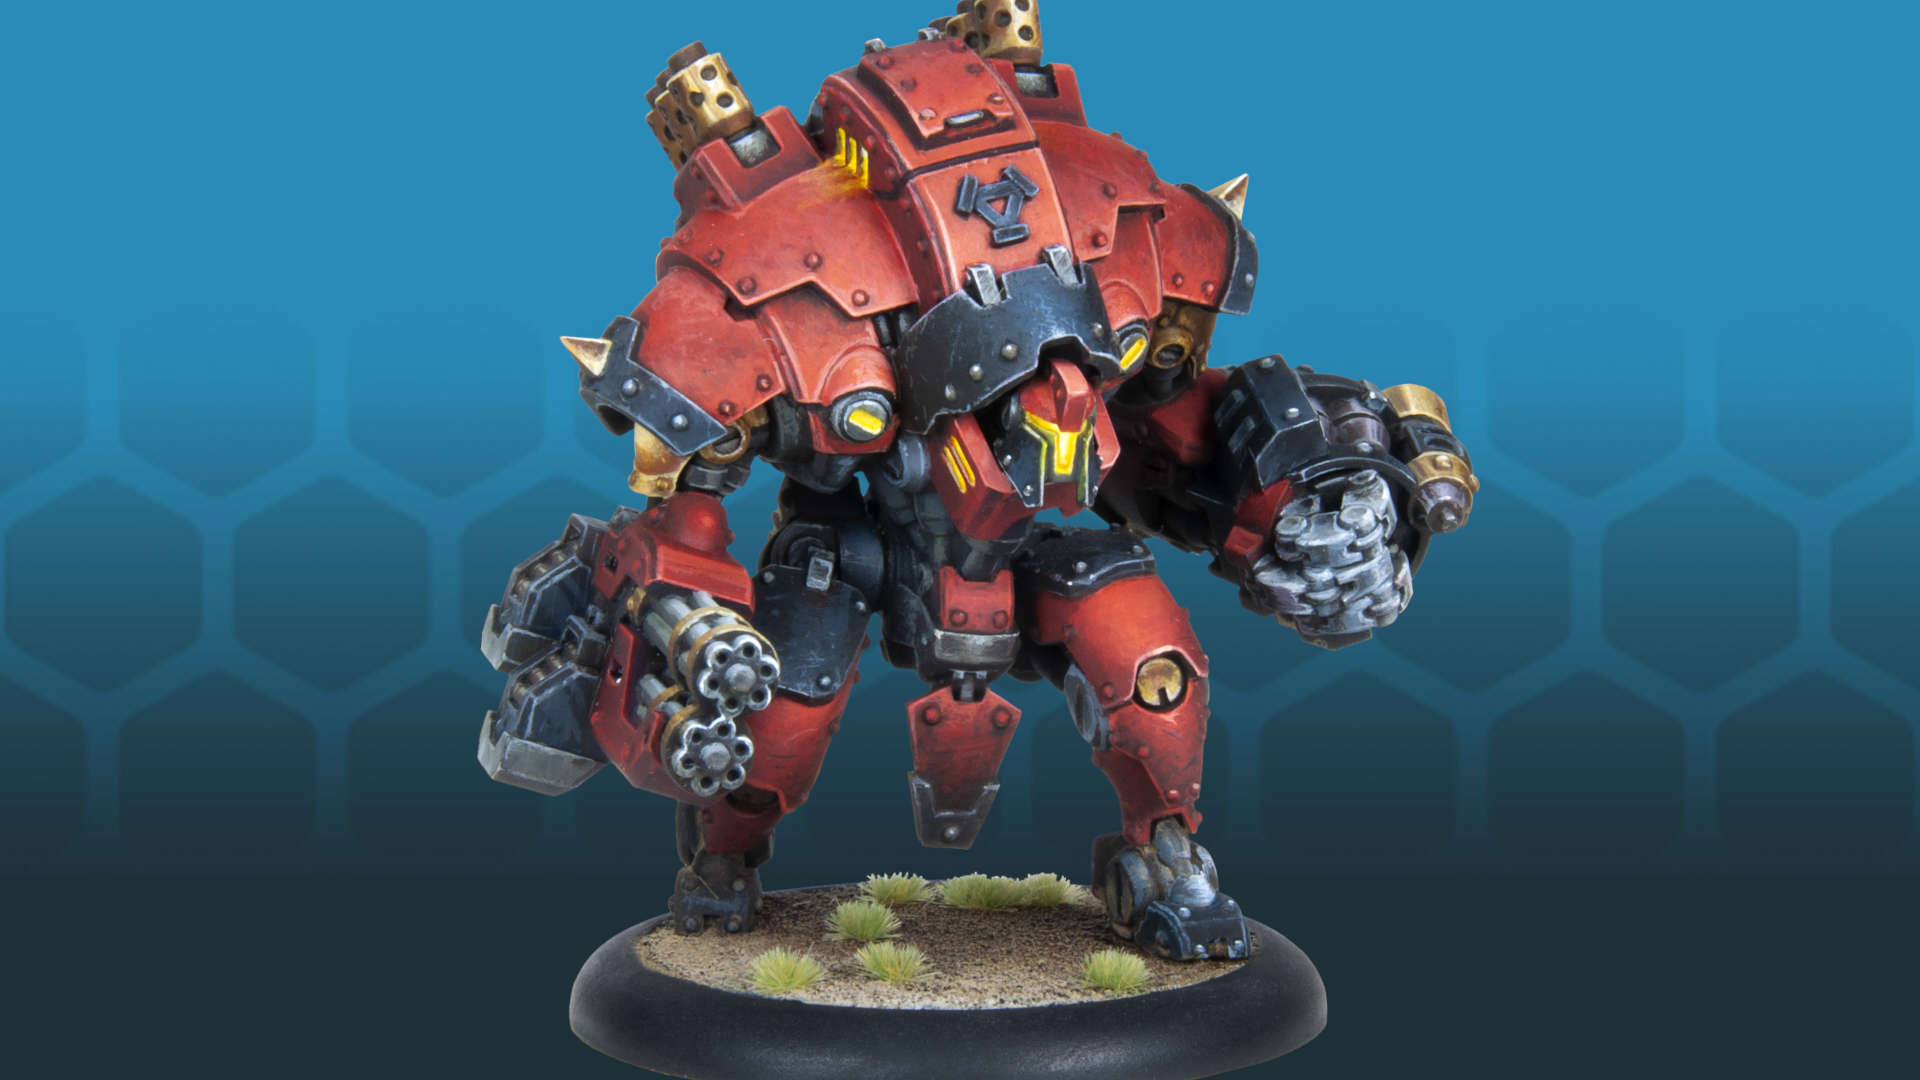 Warmachine MK4 app has all the rules you need - Khadoran warjack, a big red steam powered robot